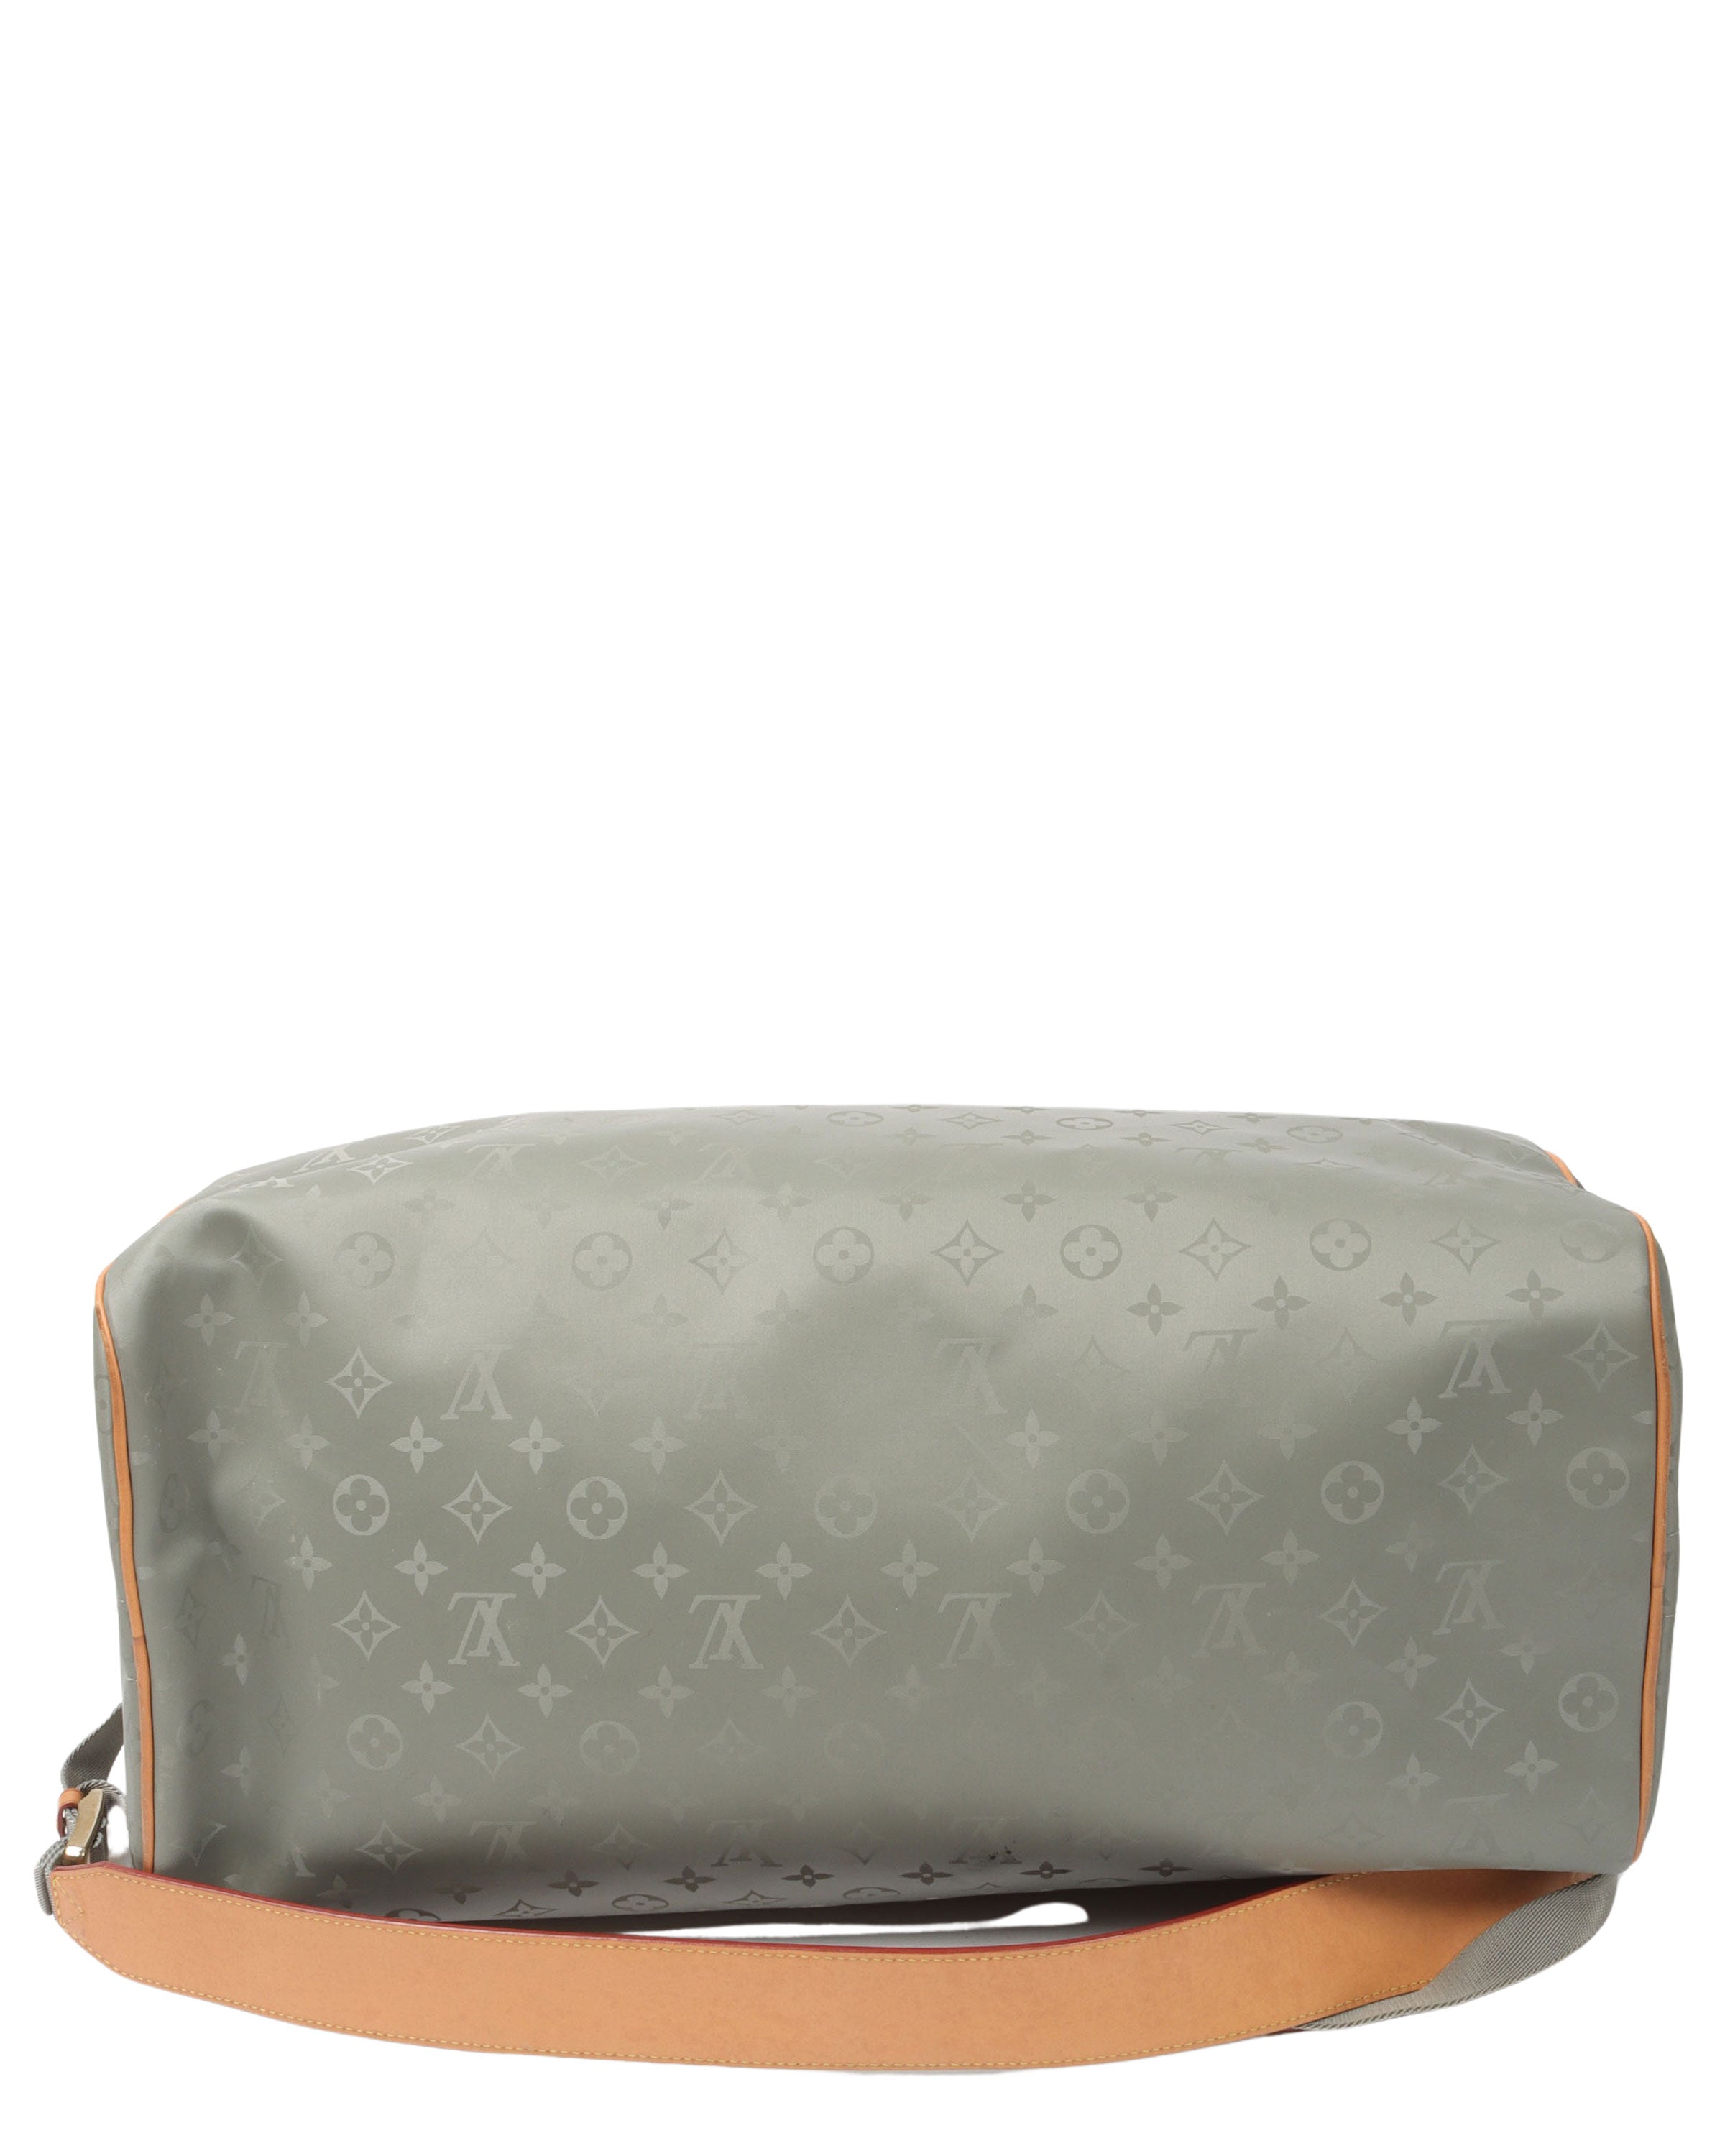 Keepall 50 Vintage Limited Edition bag in gray monogram canvas